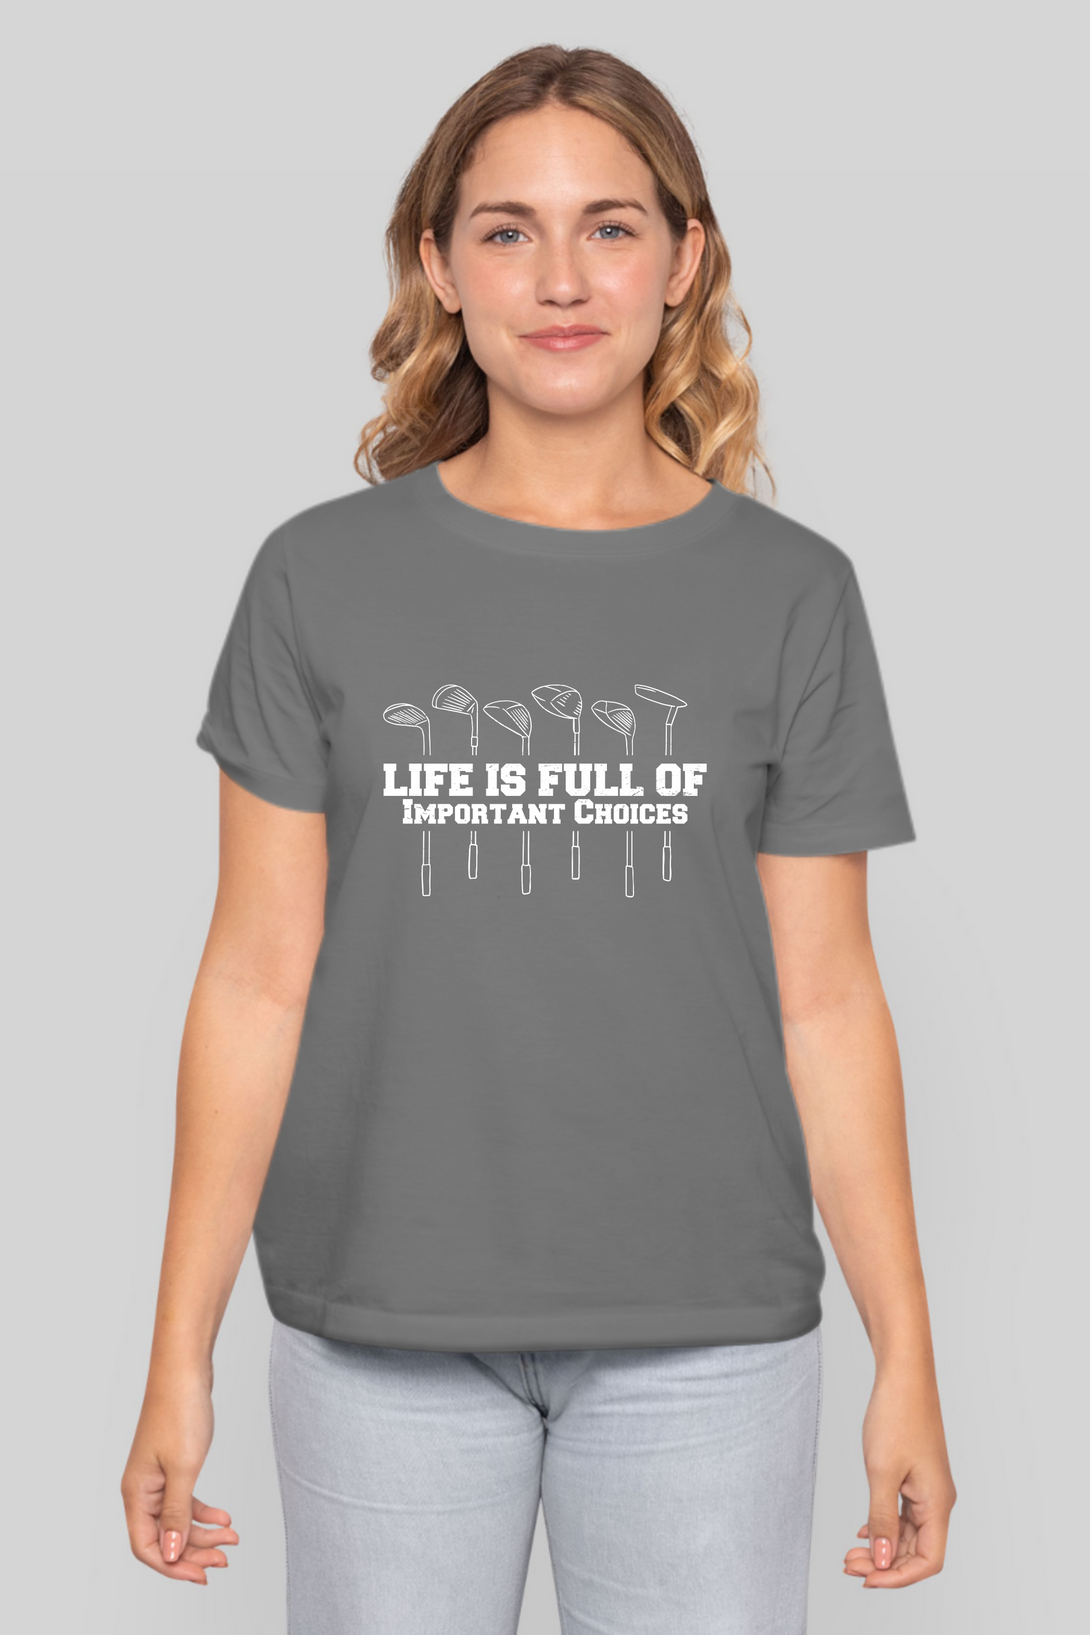 Life Is Full Of Important Choices Printed T-Shirt For Women - WowWaves - 8